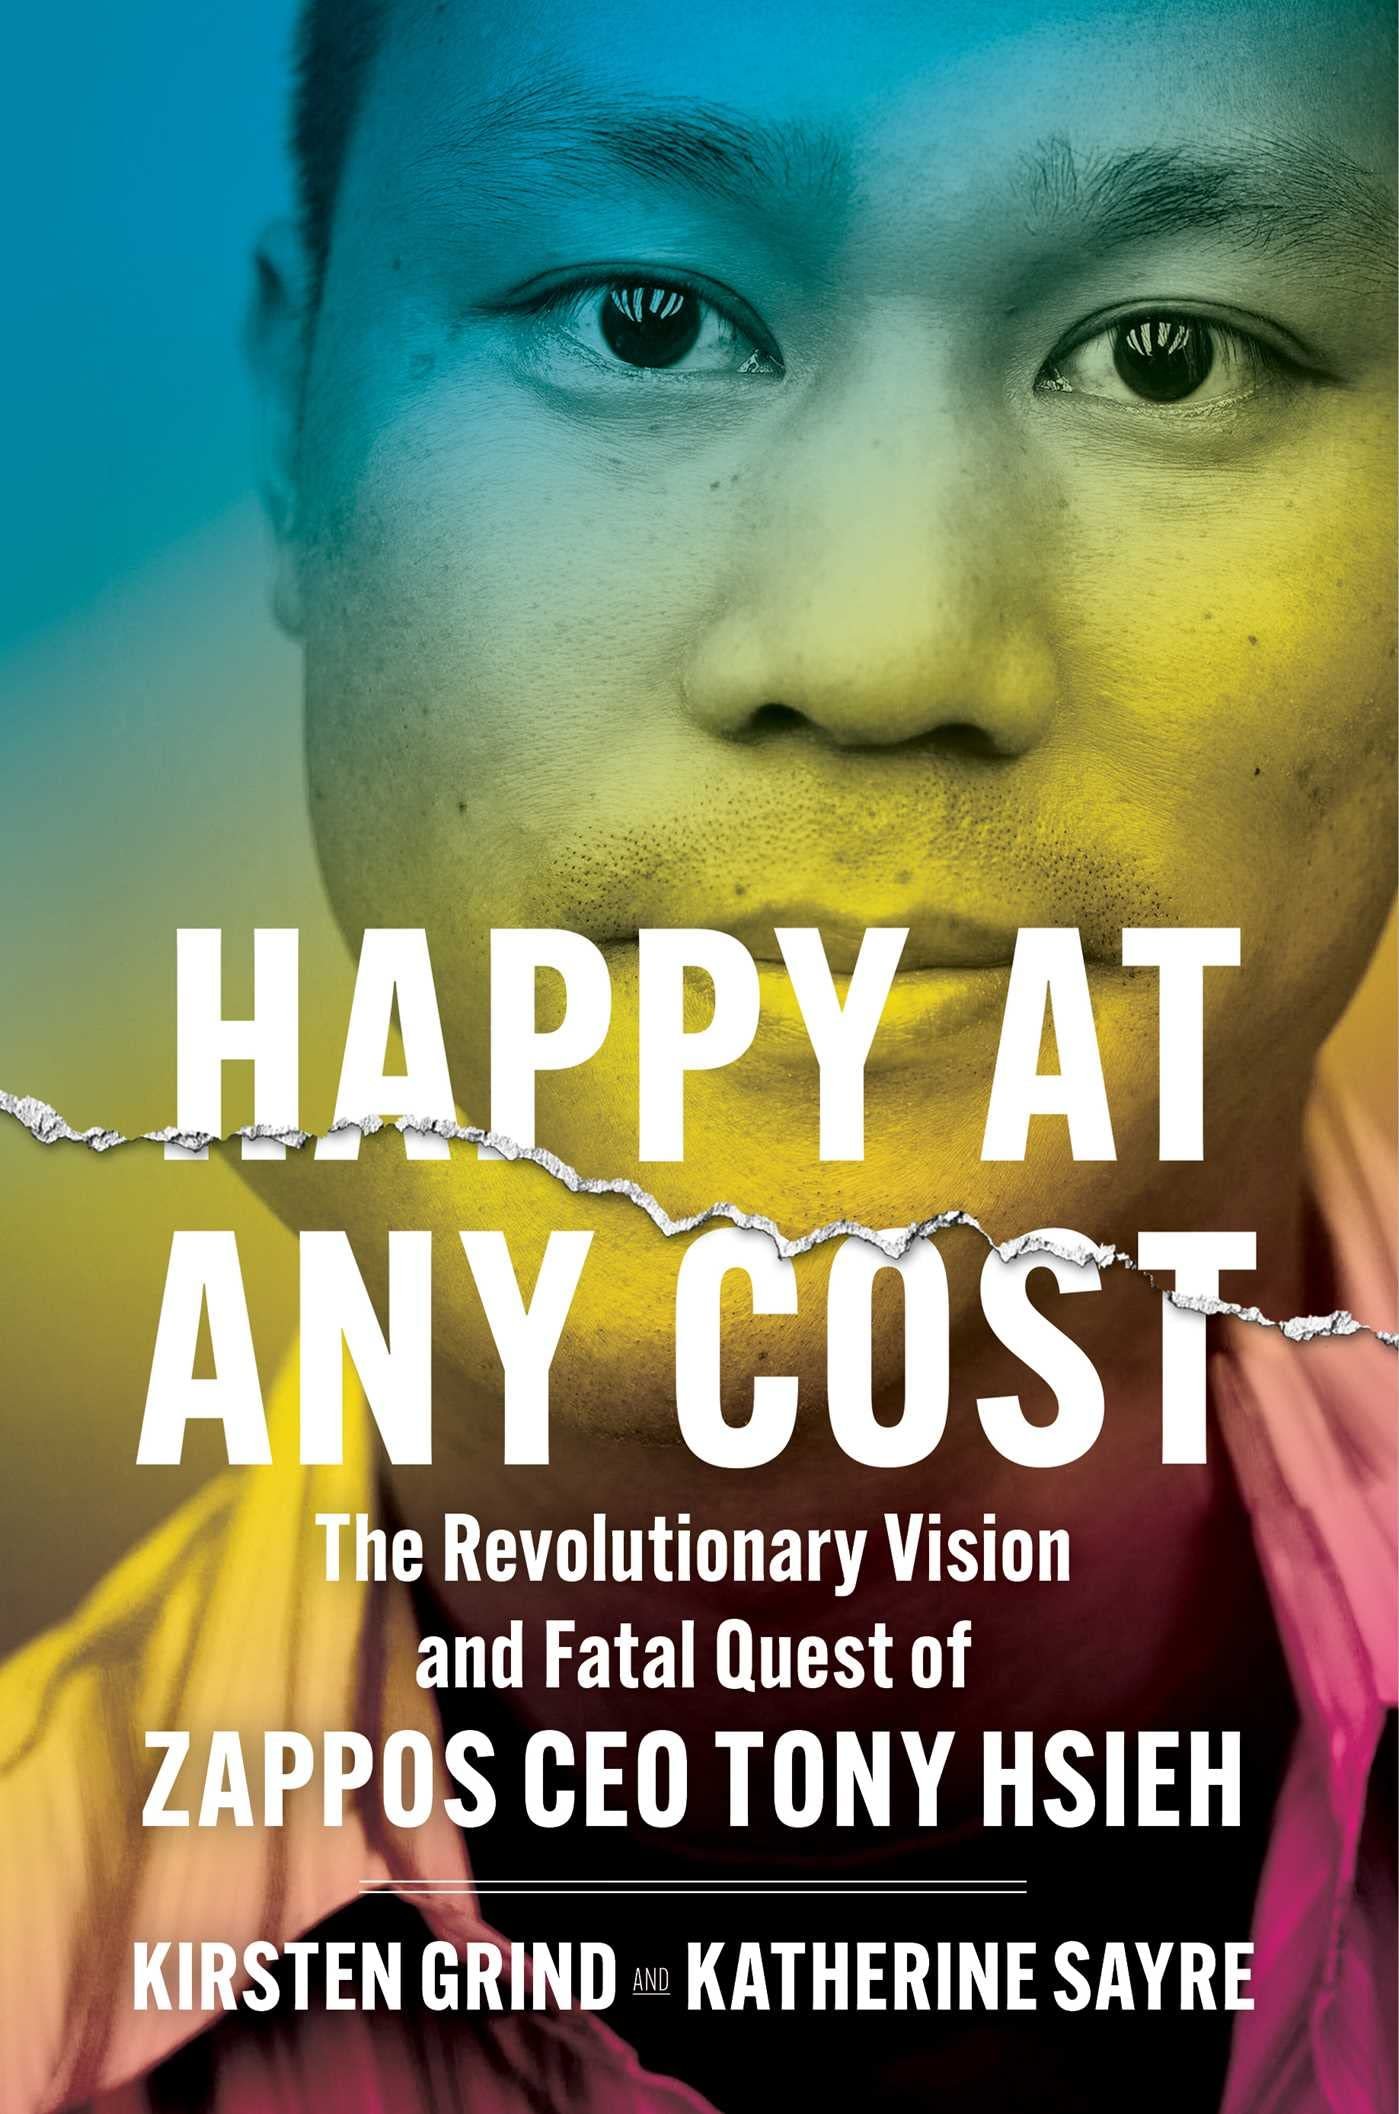 Happy at Any Cost: The Revolutionary Vision and Fatal Quest of Zappos CEO Tony Hsieh by Kirsten Grind and Katherine Sayre